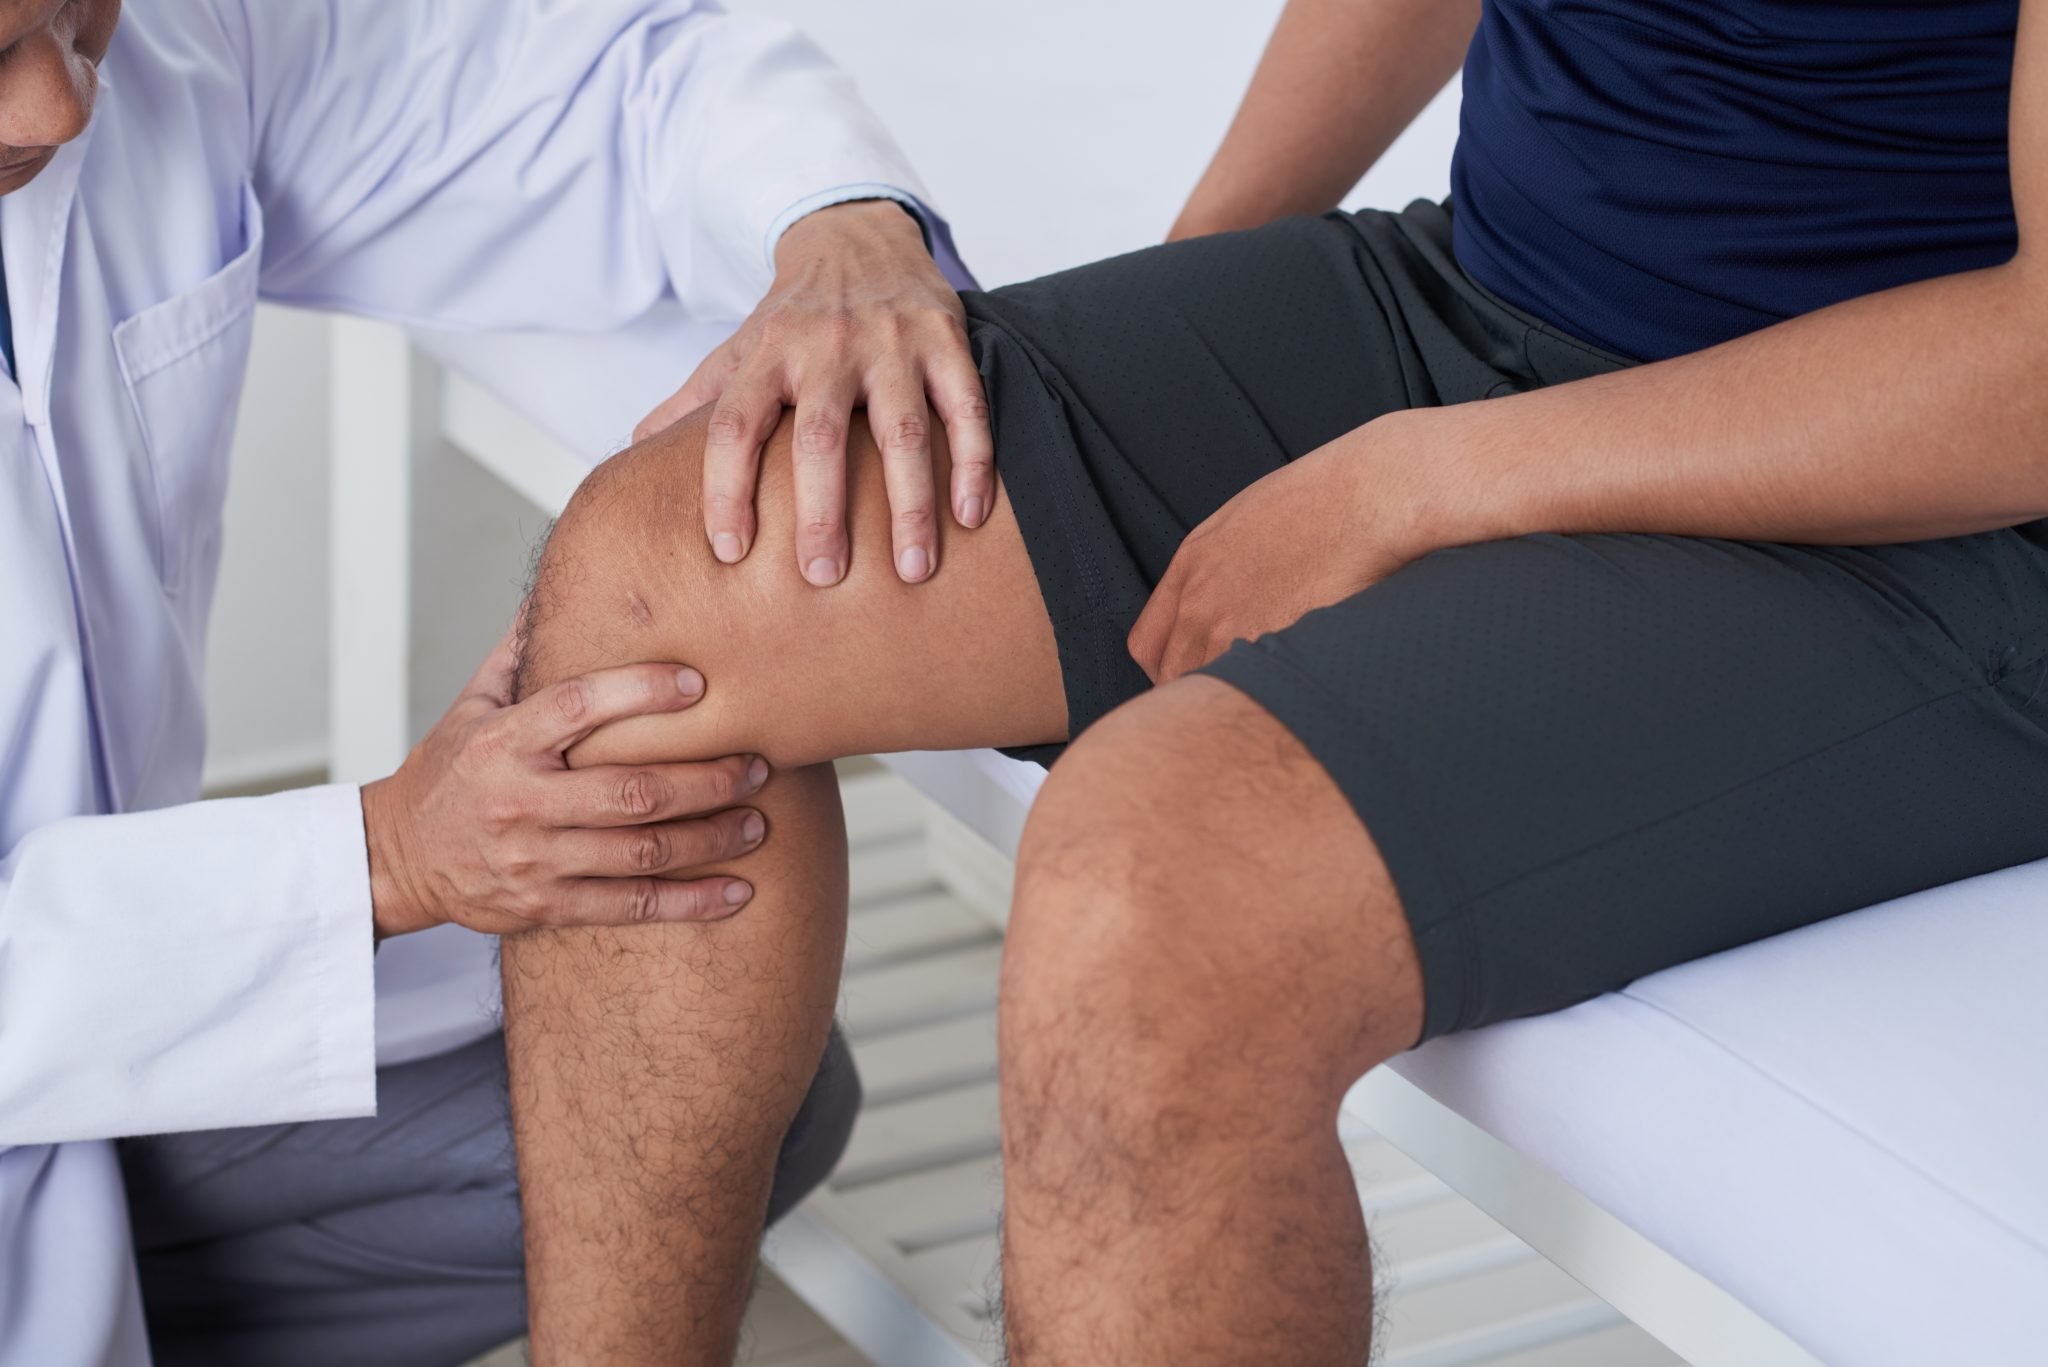 What do doctors recommend for knee pain?